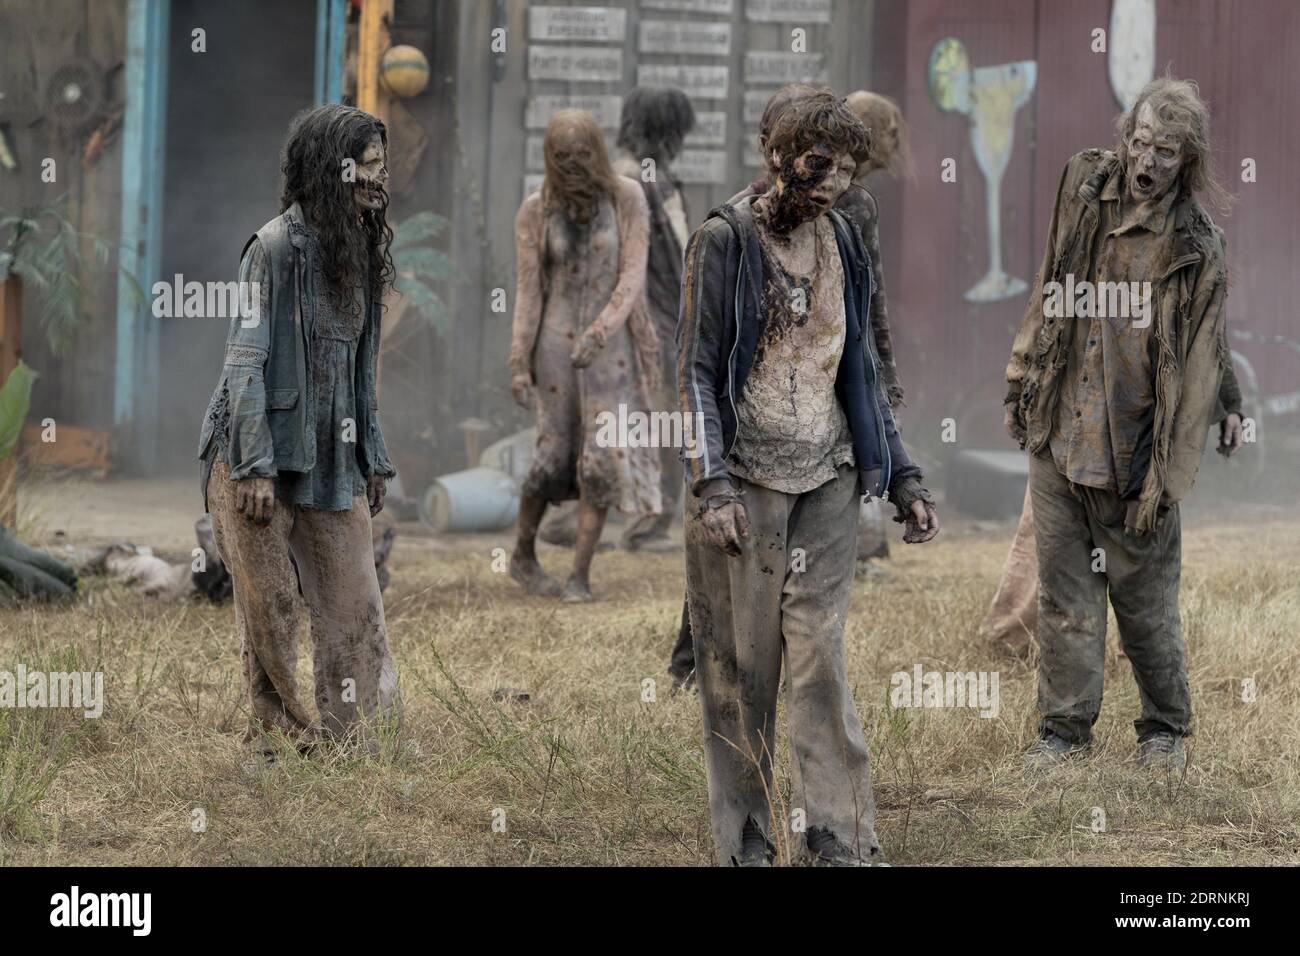 The walking dead poster hi-res stock photography and images - Alamy